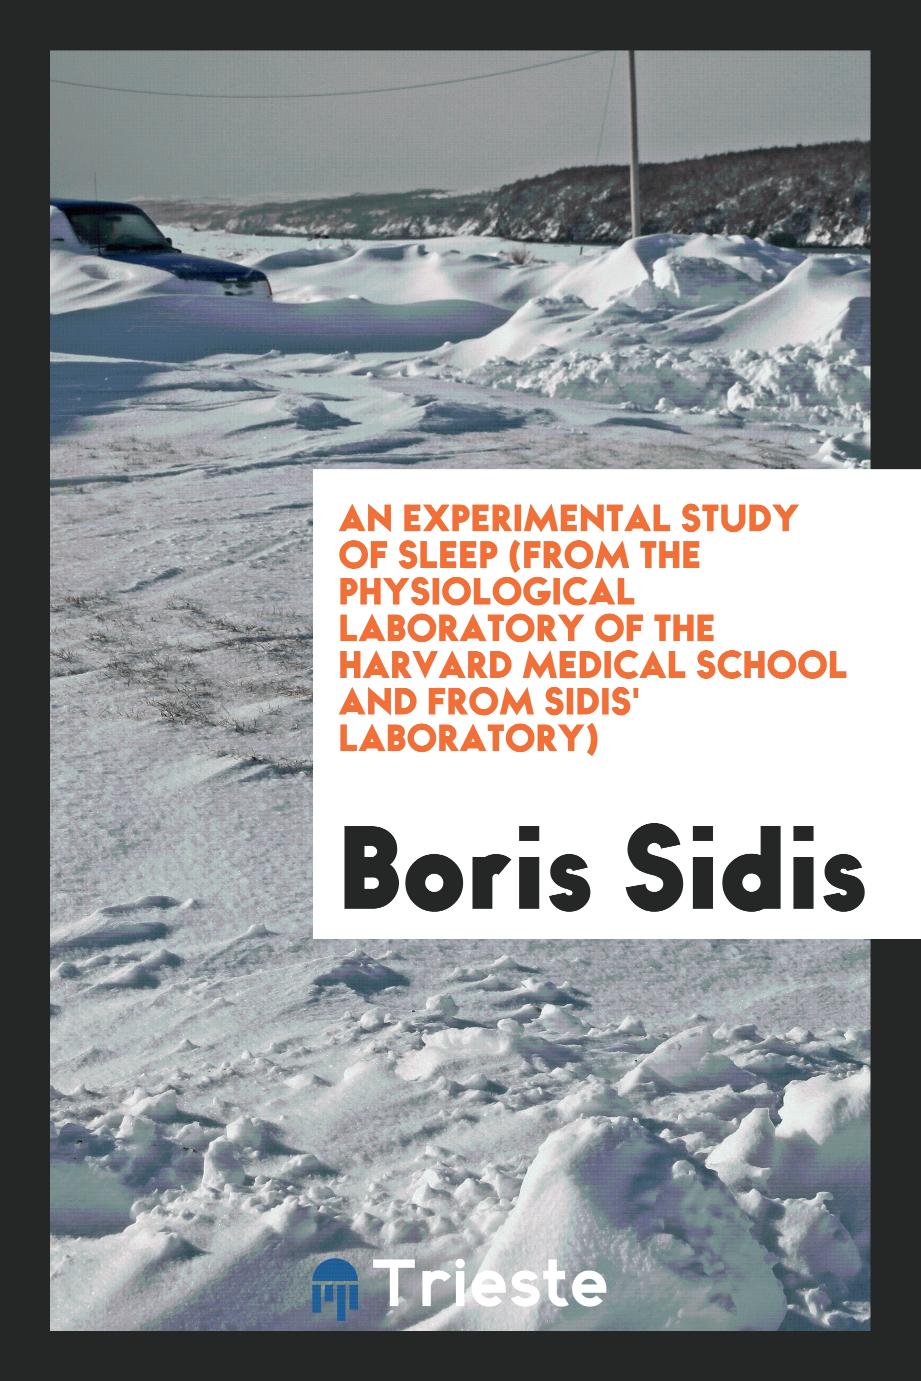 An Experimental Study of Sleep (from the Physiological Laboratory of the Harvard Medical School and from Sidis' Laboratory)